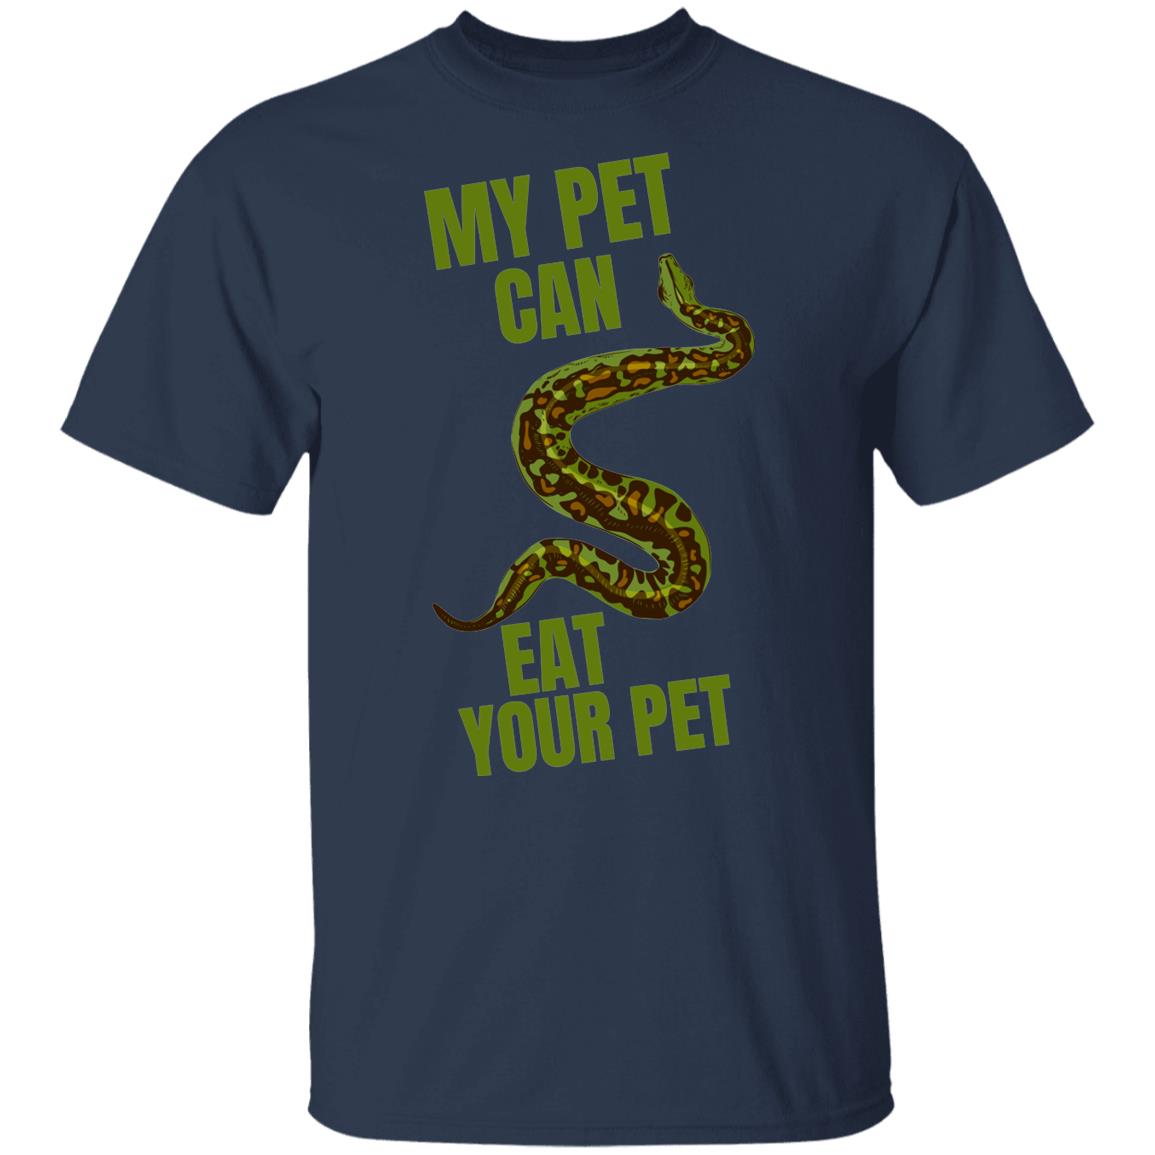 My Pet Can Eat Your Pet - Youth T-Shirt